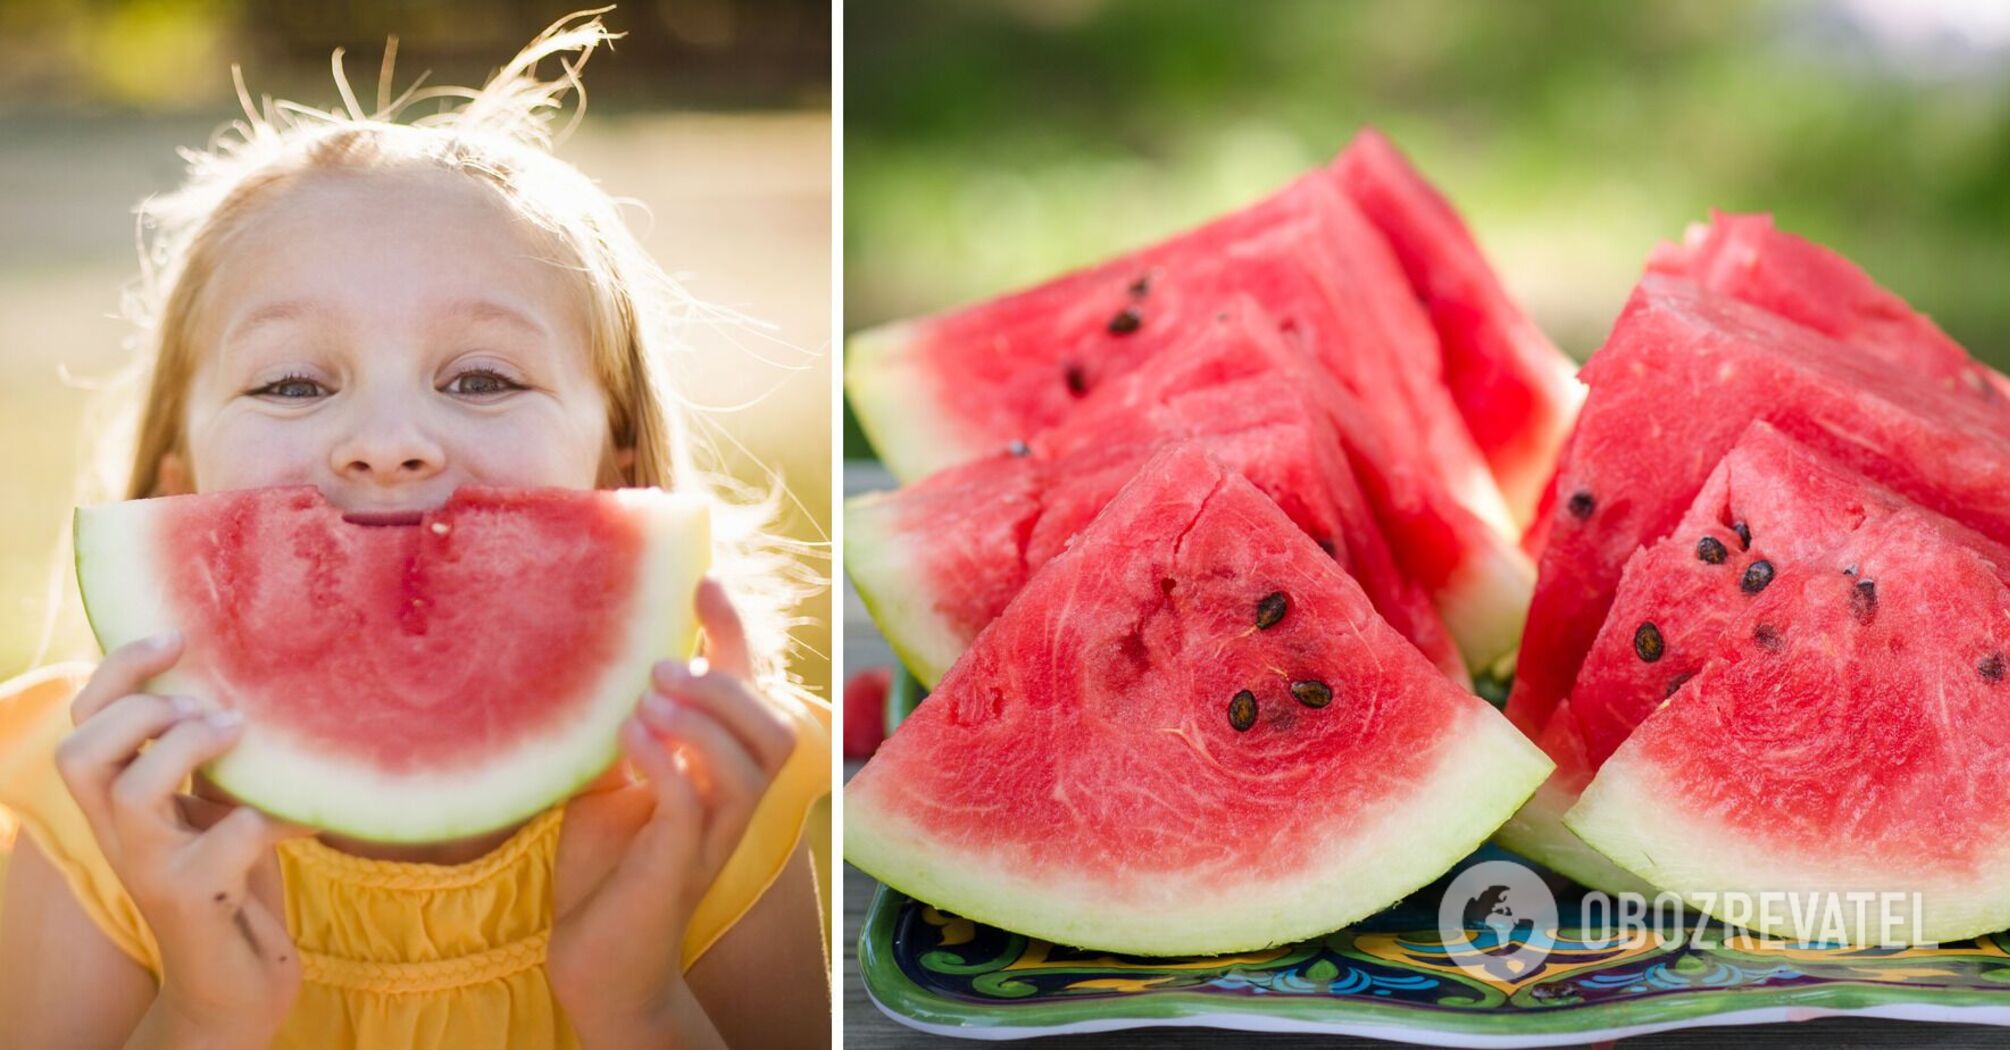 How to choose a good watermelon: the expert announced the top signs